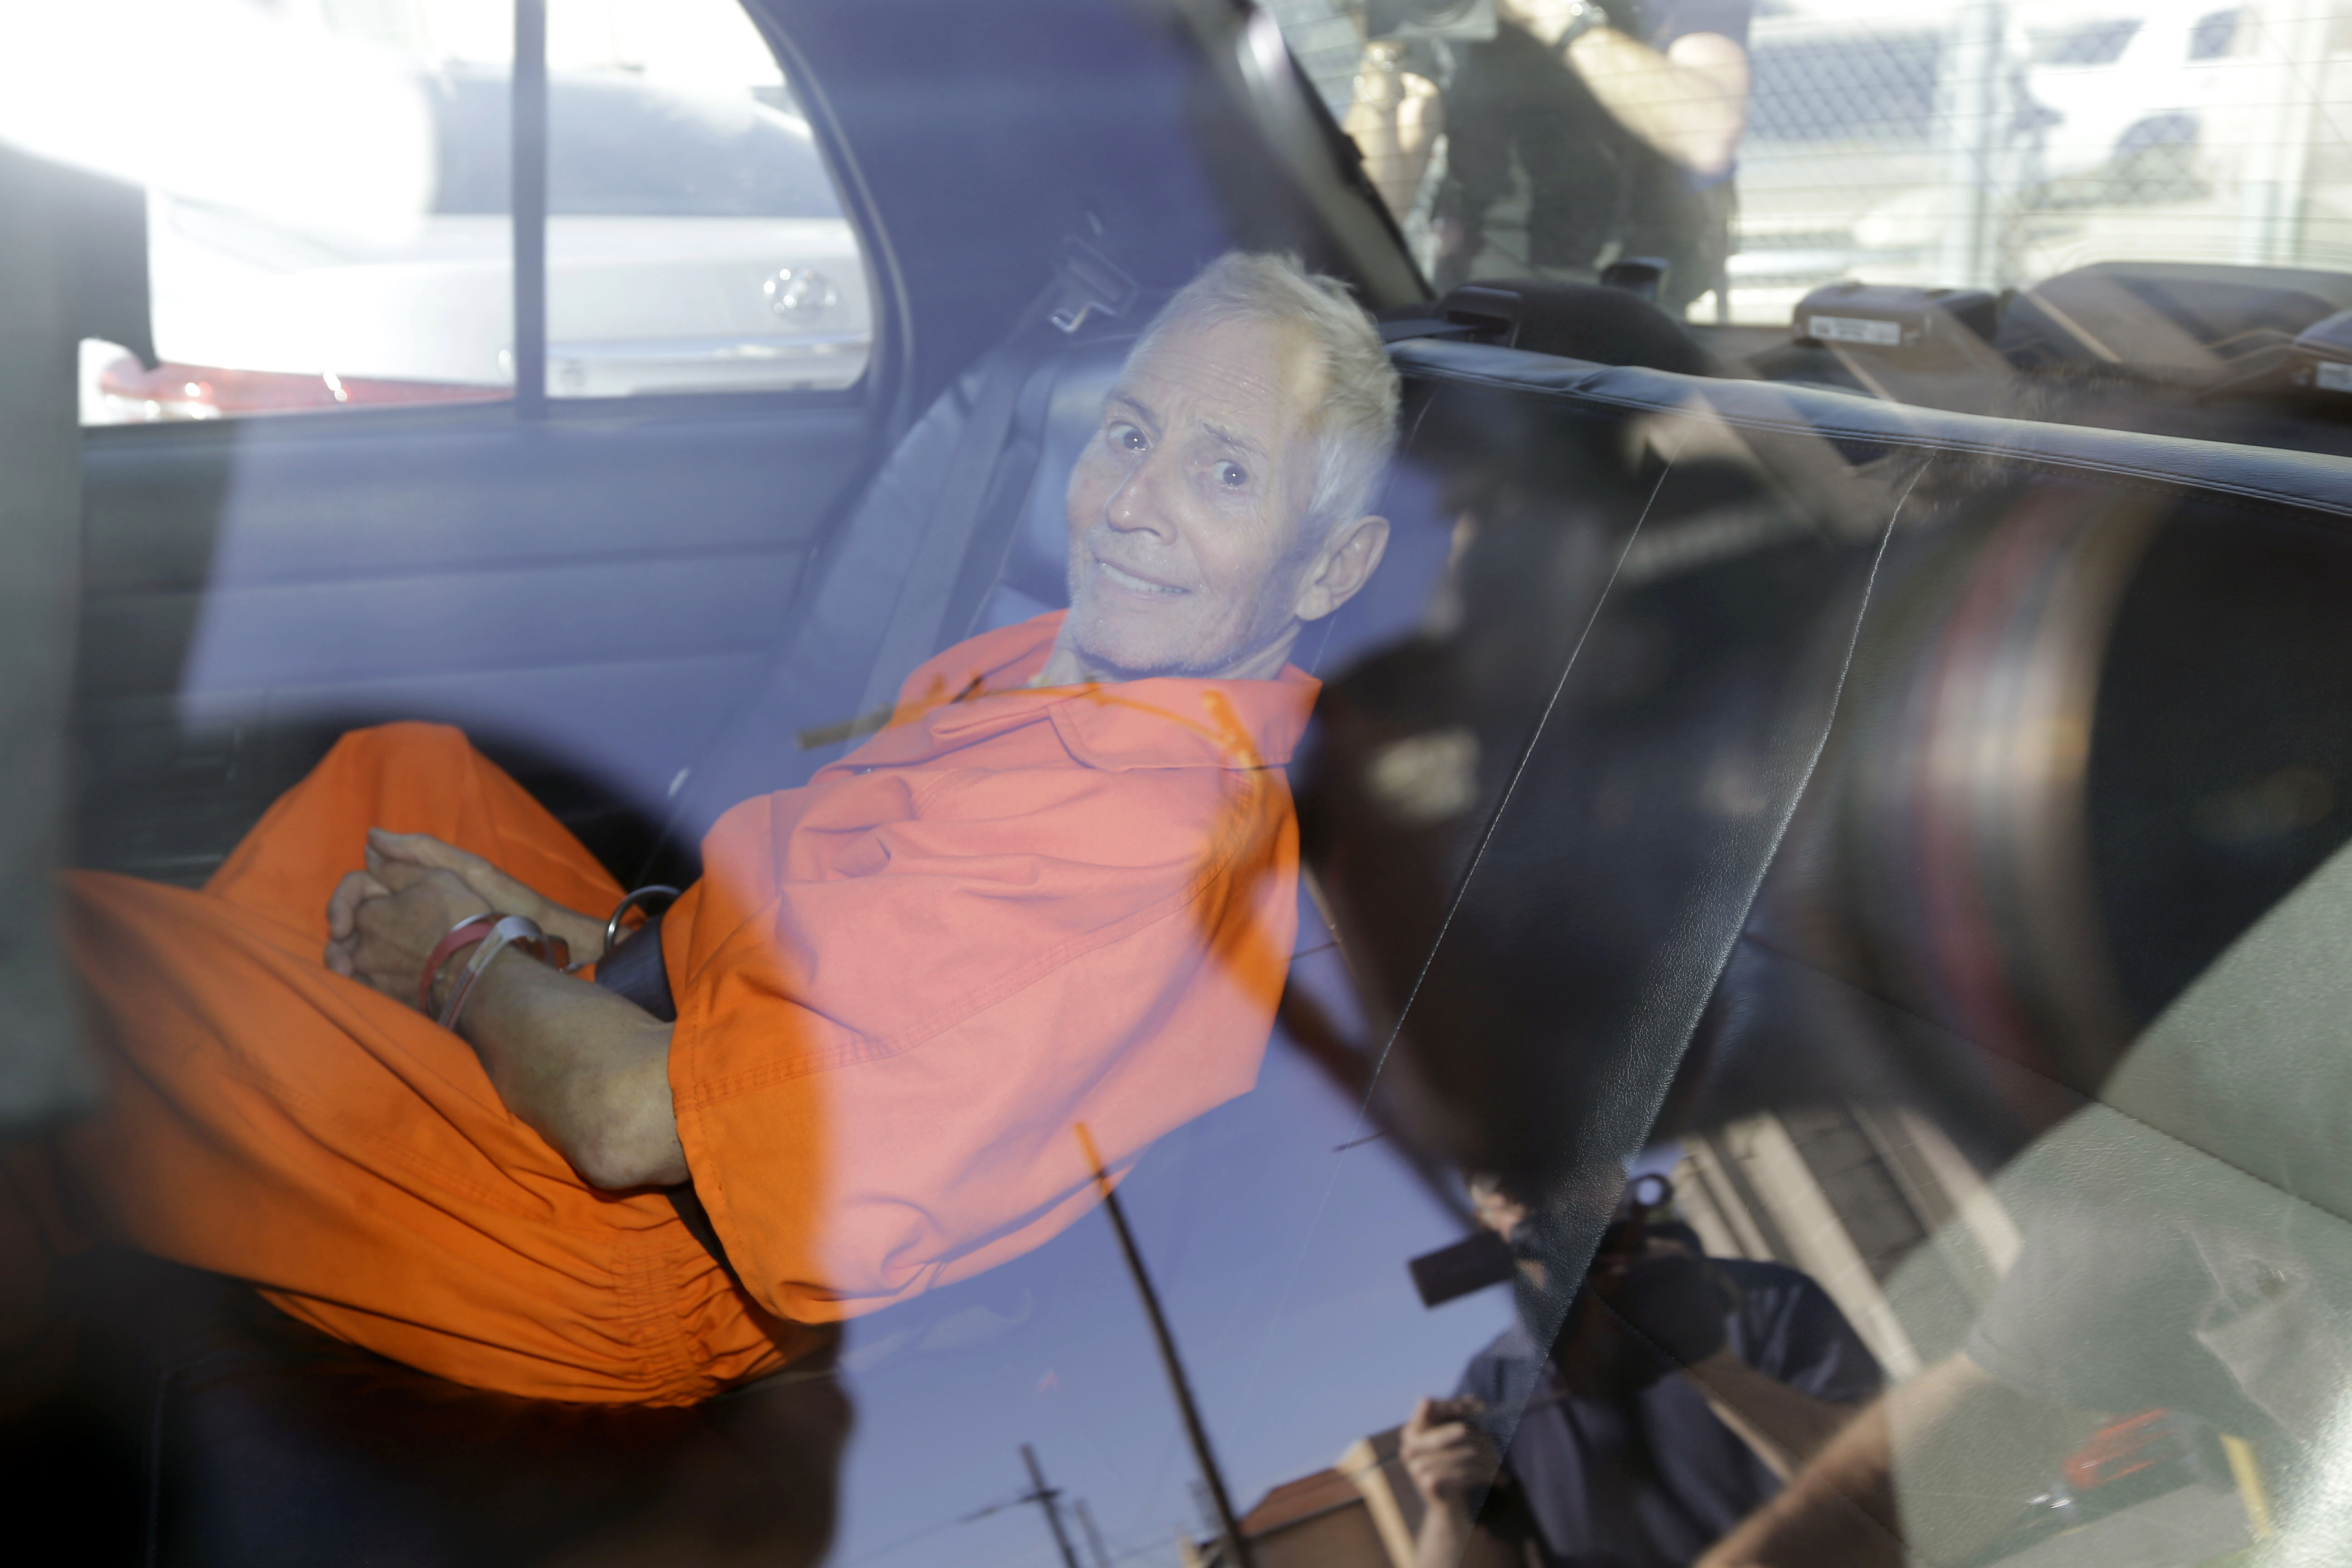 Robert Durst is transported from Orleans Parish Criminal District Court to the Orleans Parish Prison after his arraignment in New Orleans in March 2015.